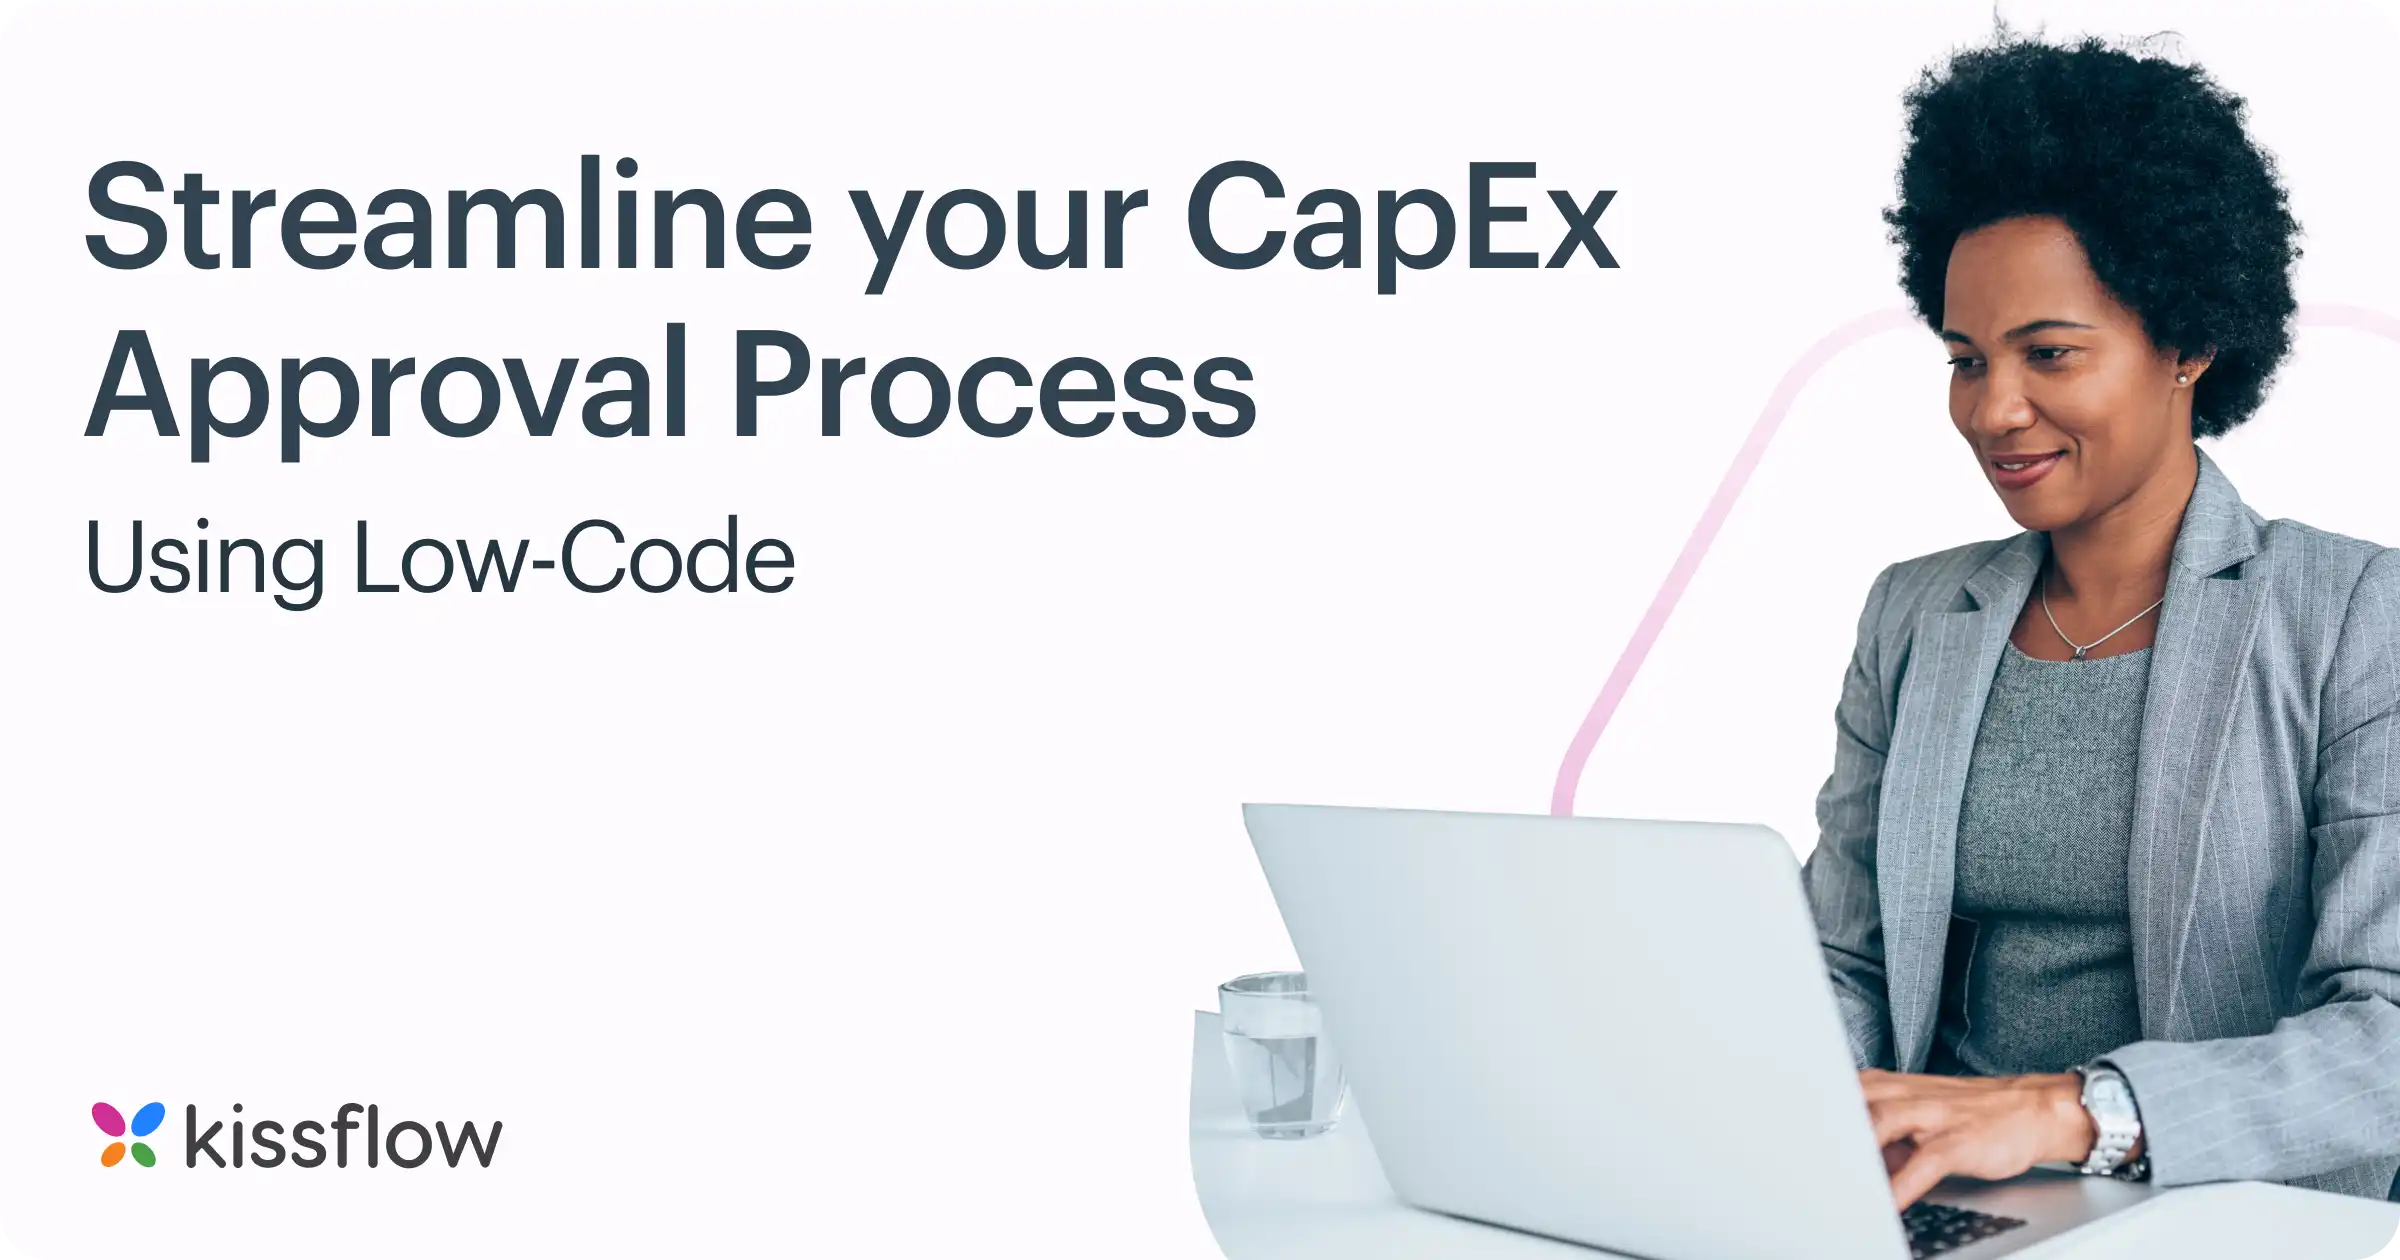 Streamline your CapEx approval process using low-code